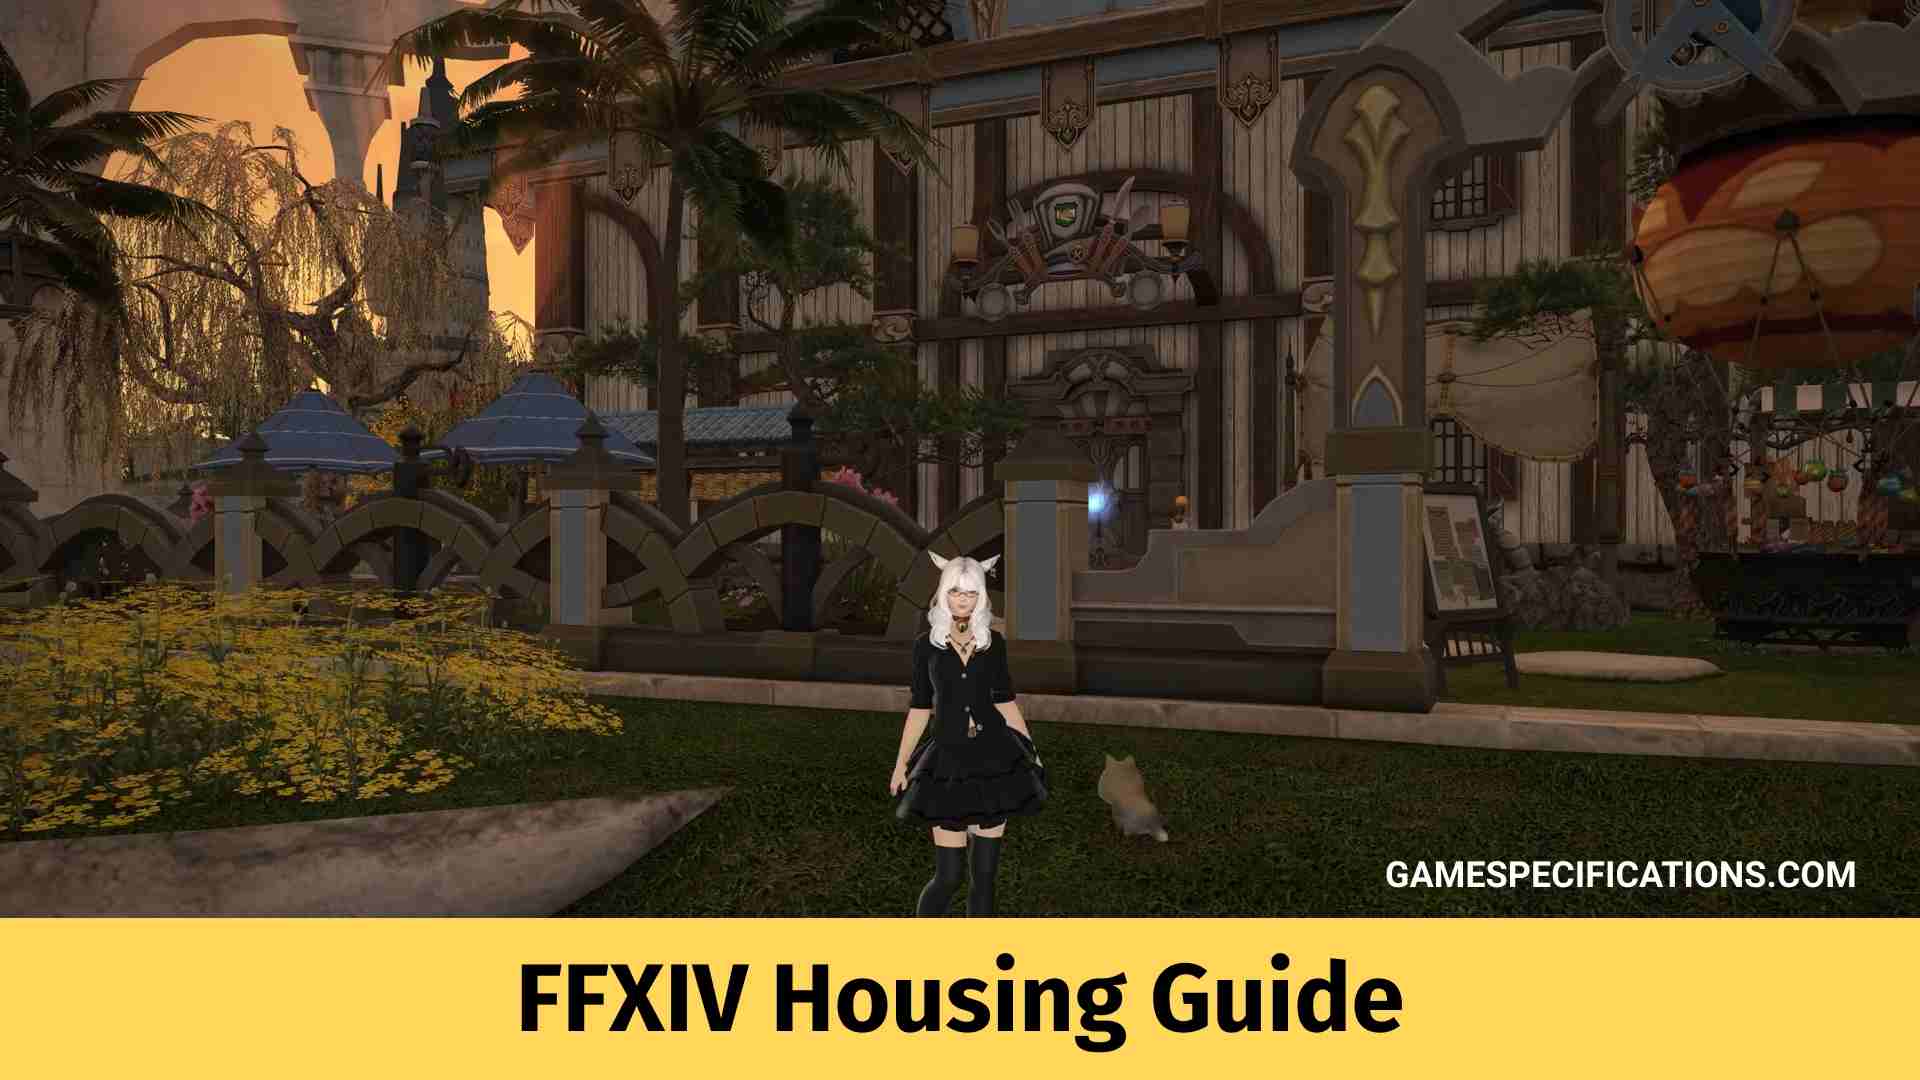 Ffxiv Private Chambers Guide Ethica Odini House Ff14 Album On Imgur